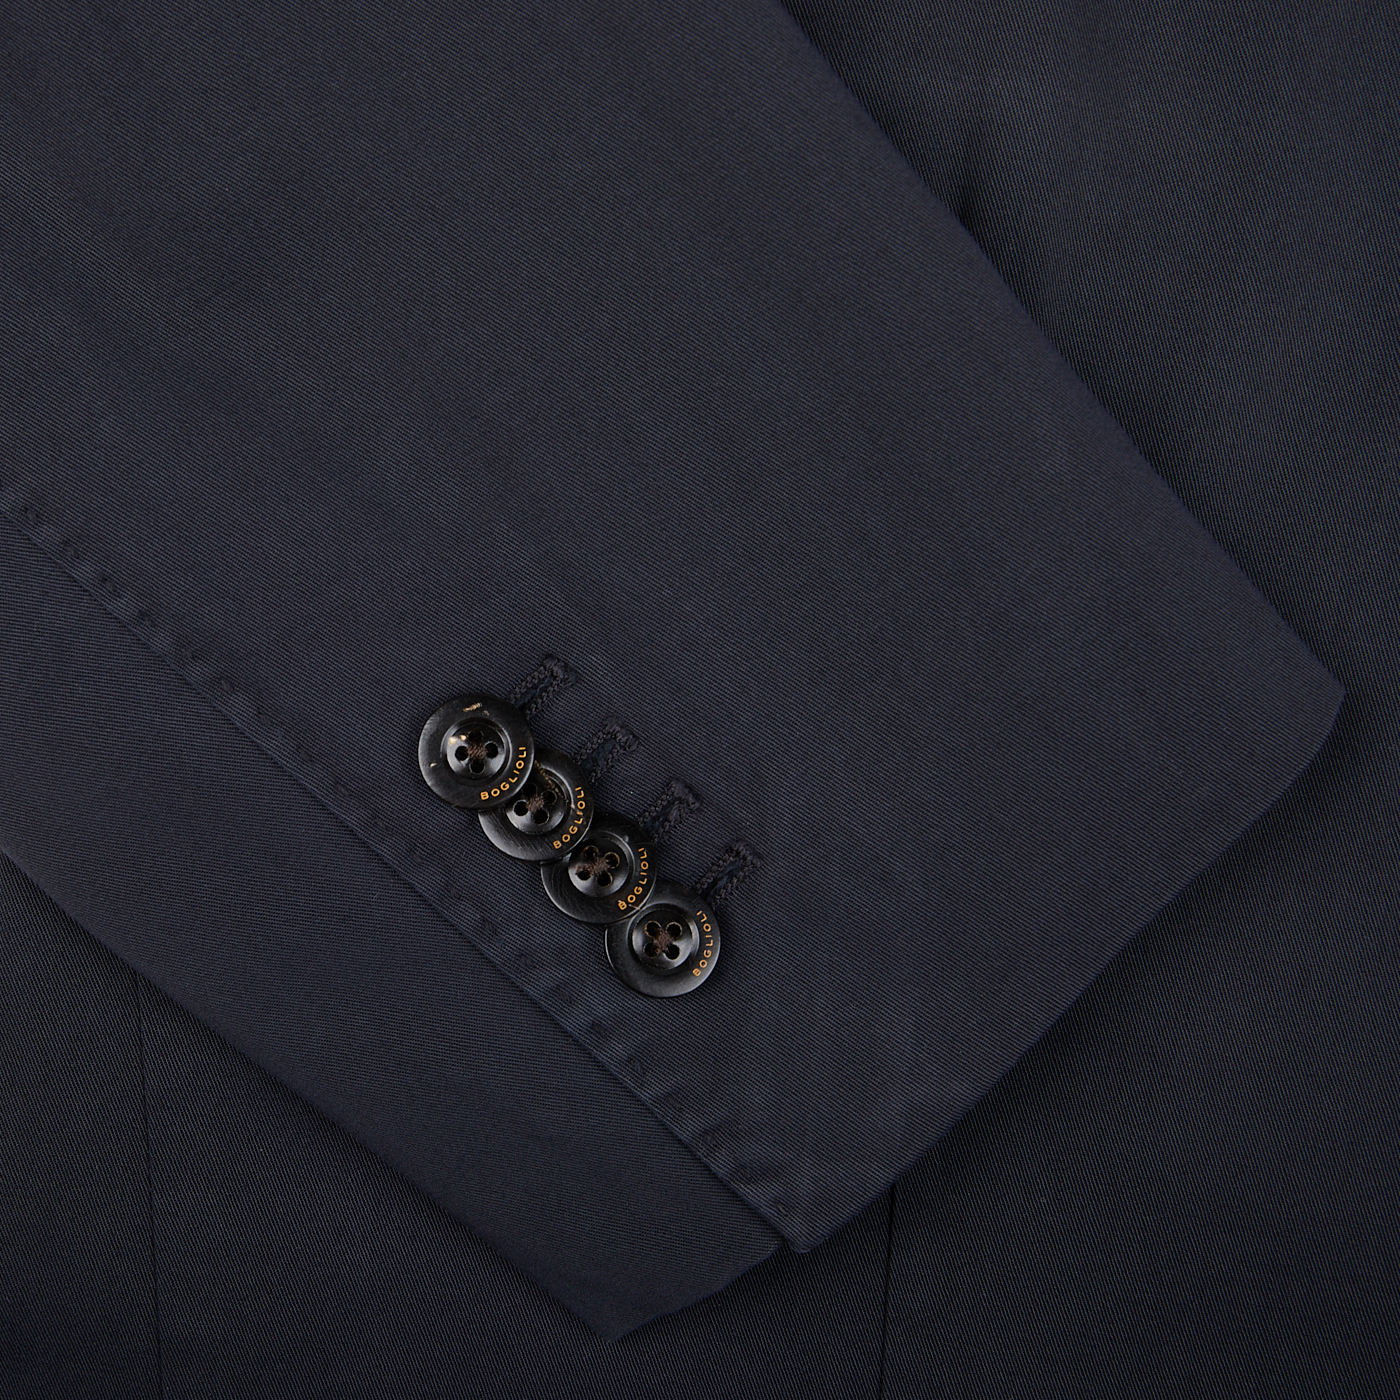 Close-up of an unstructured Boglioli navy blue suit sleeve with four buttons, indicative of K.Jacket's Italian craftsmanship.